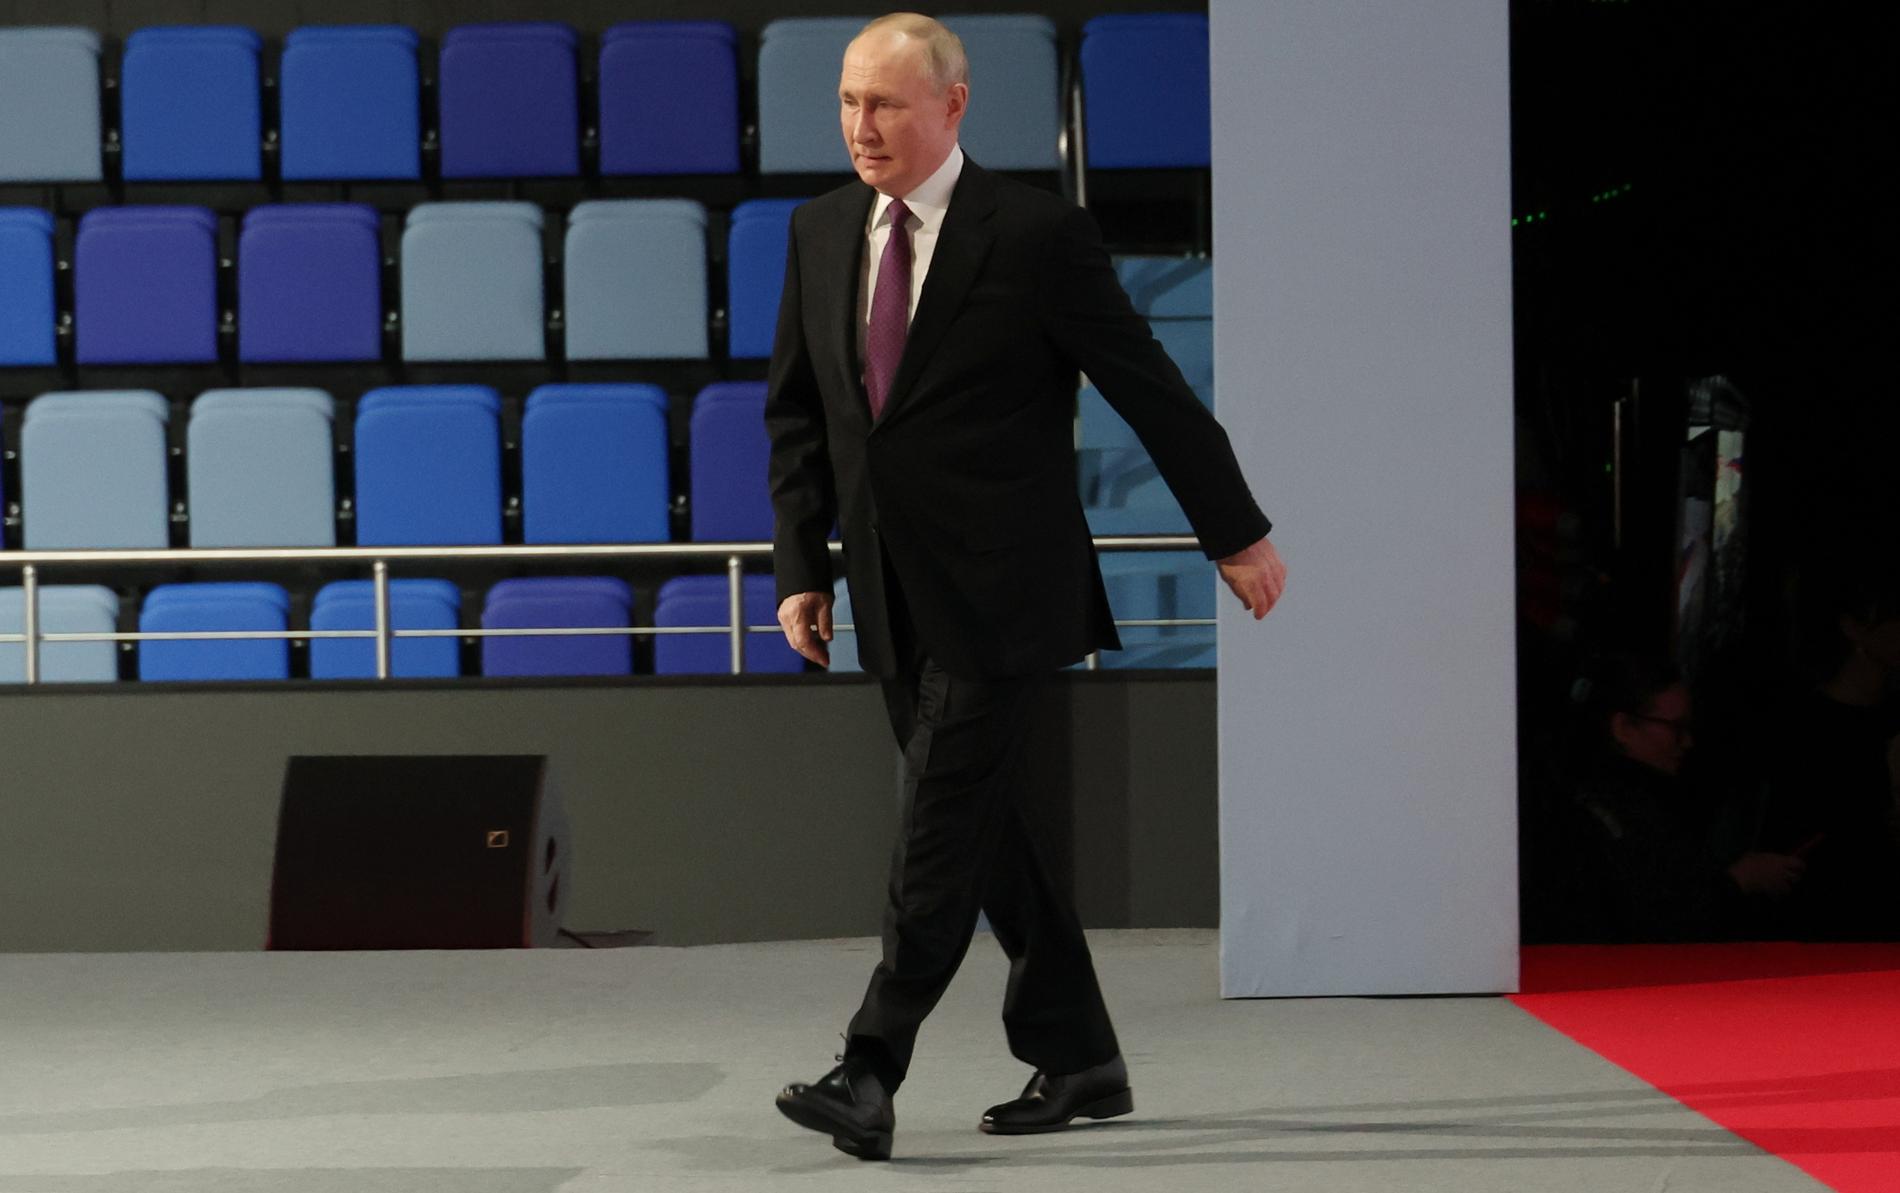 Vladimir Putin arrives at a railway conference on Friday.